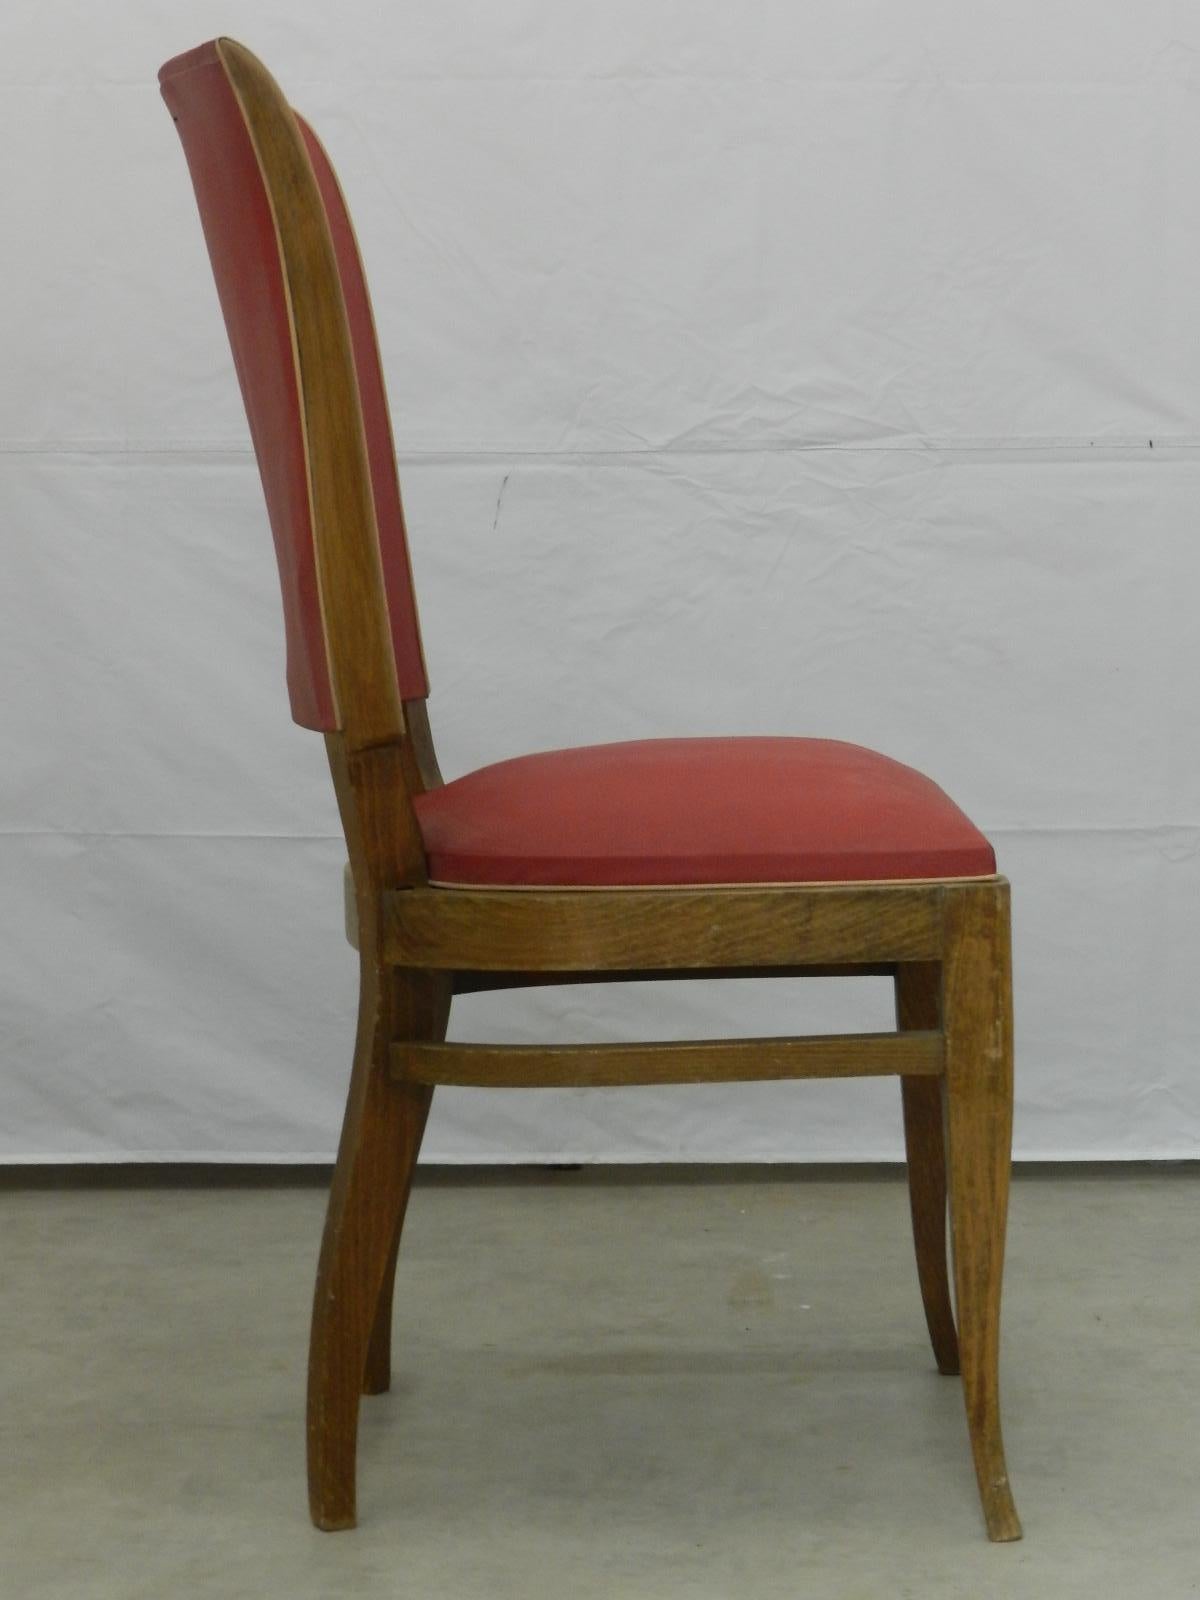 Upholstery Six Art Deco Dining Chairs French to Recover / Restore, circa 1930